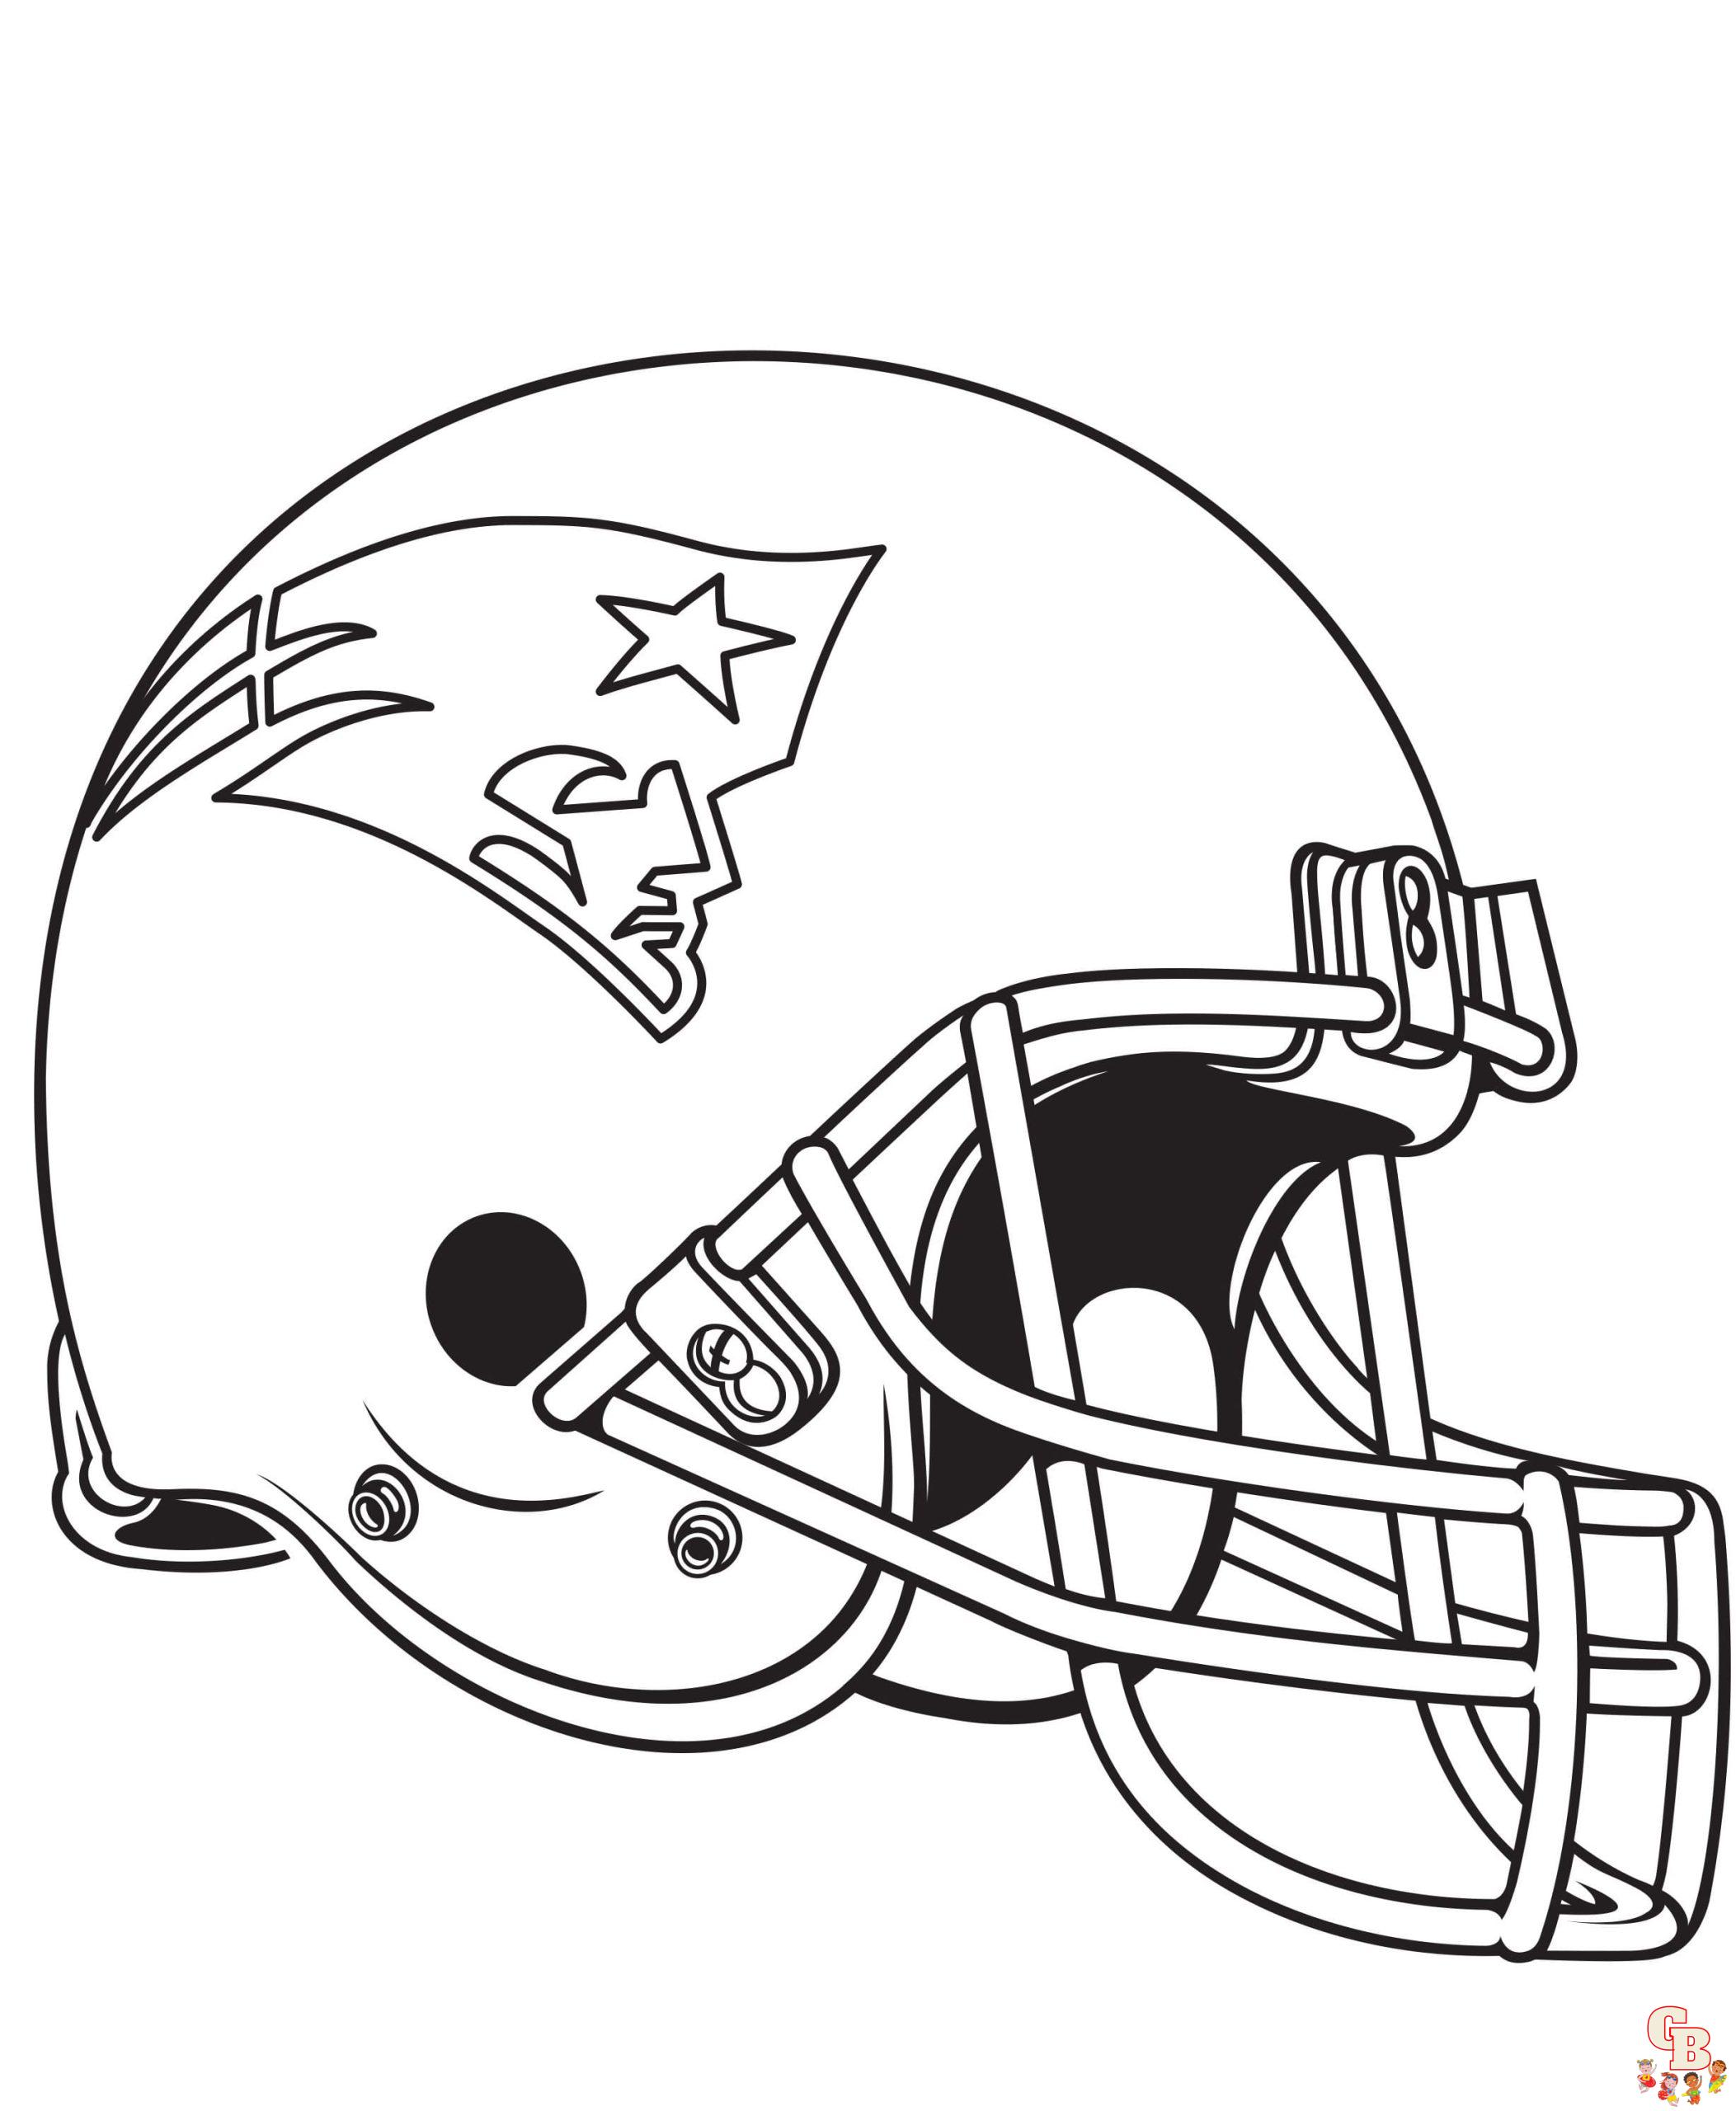 Free Patriot coloring pages for kids